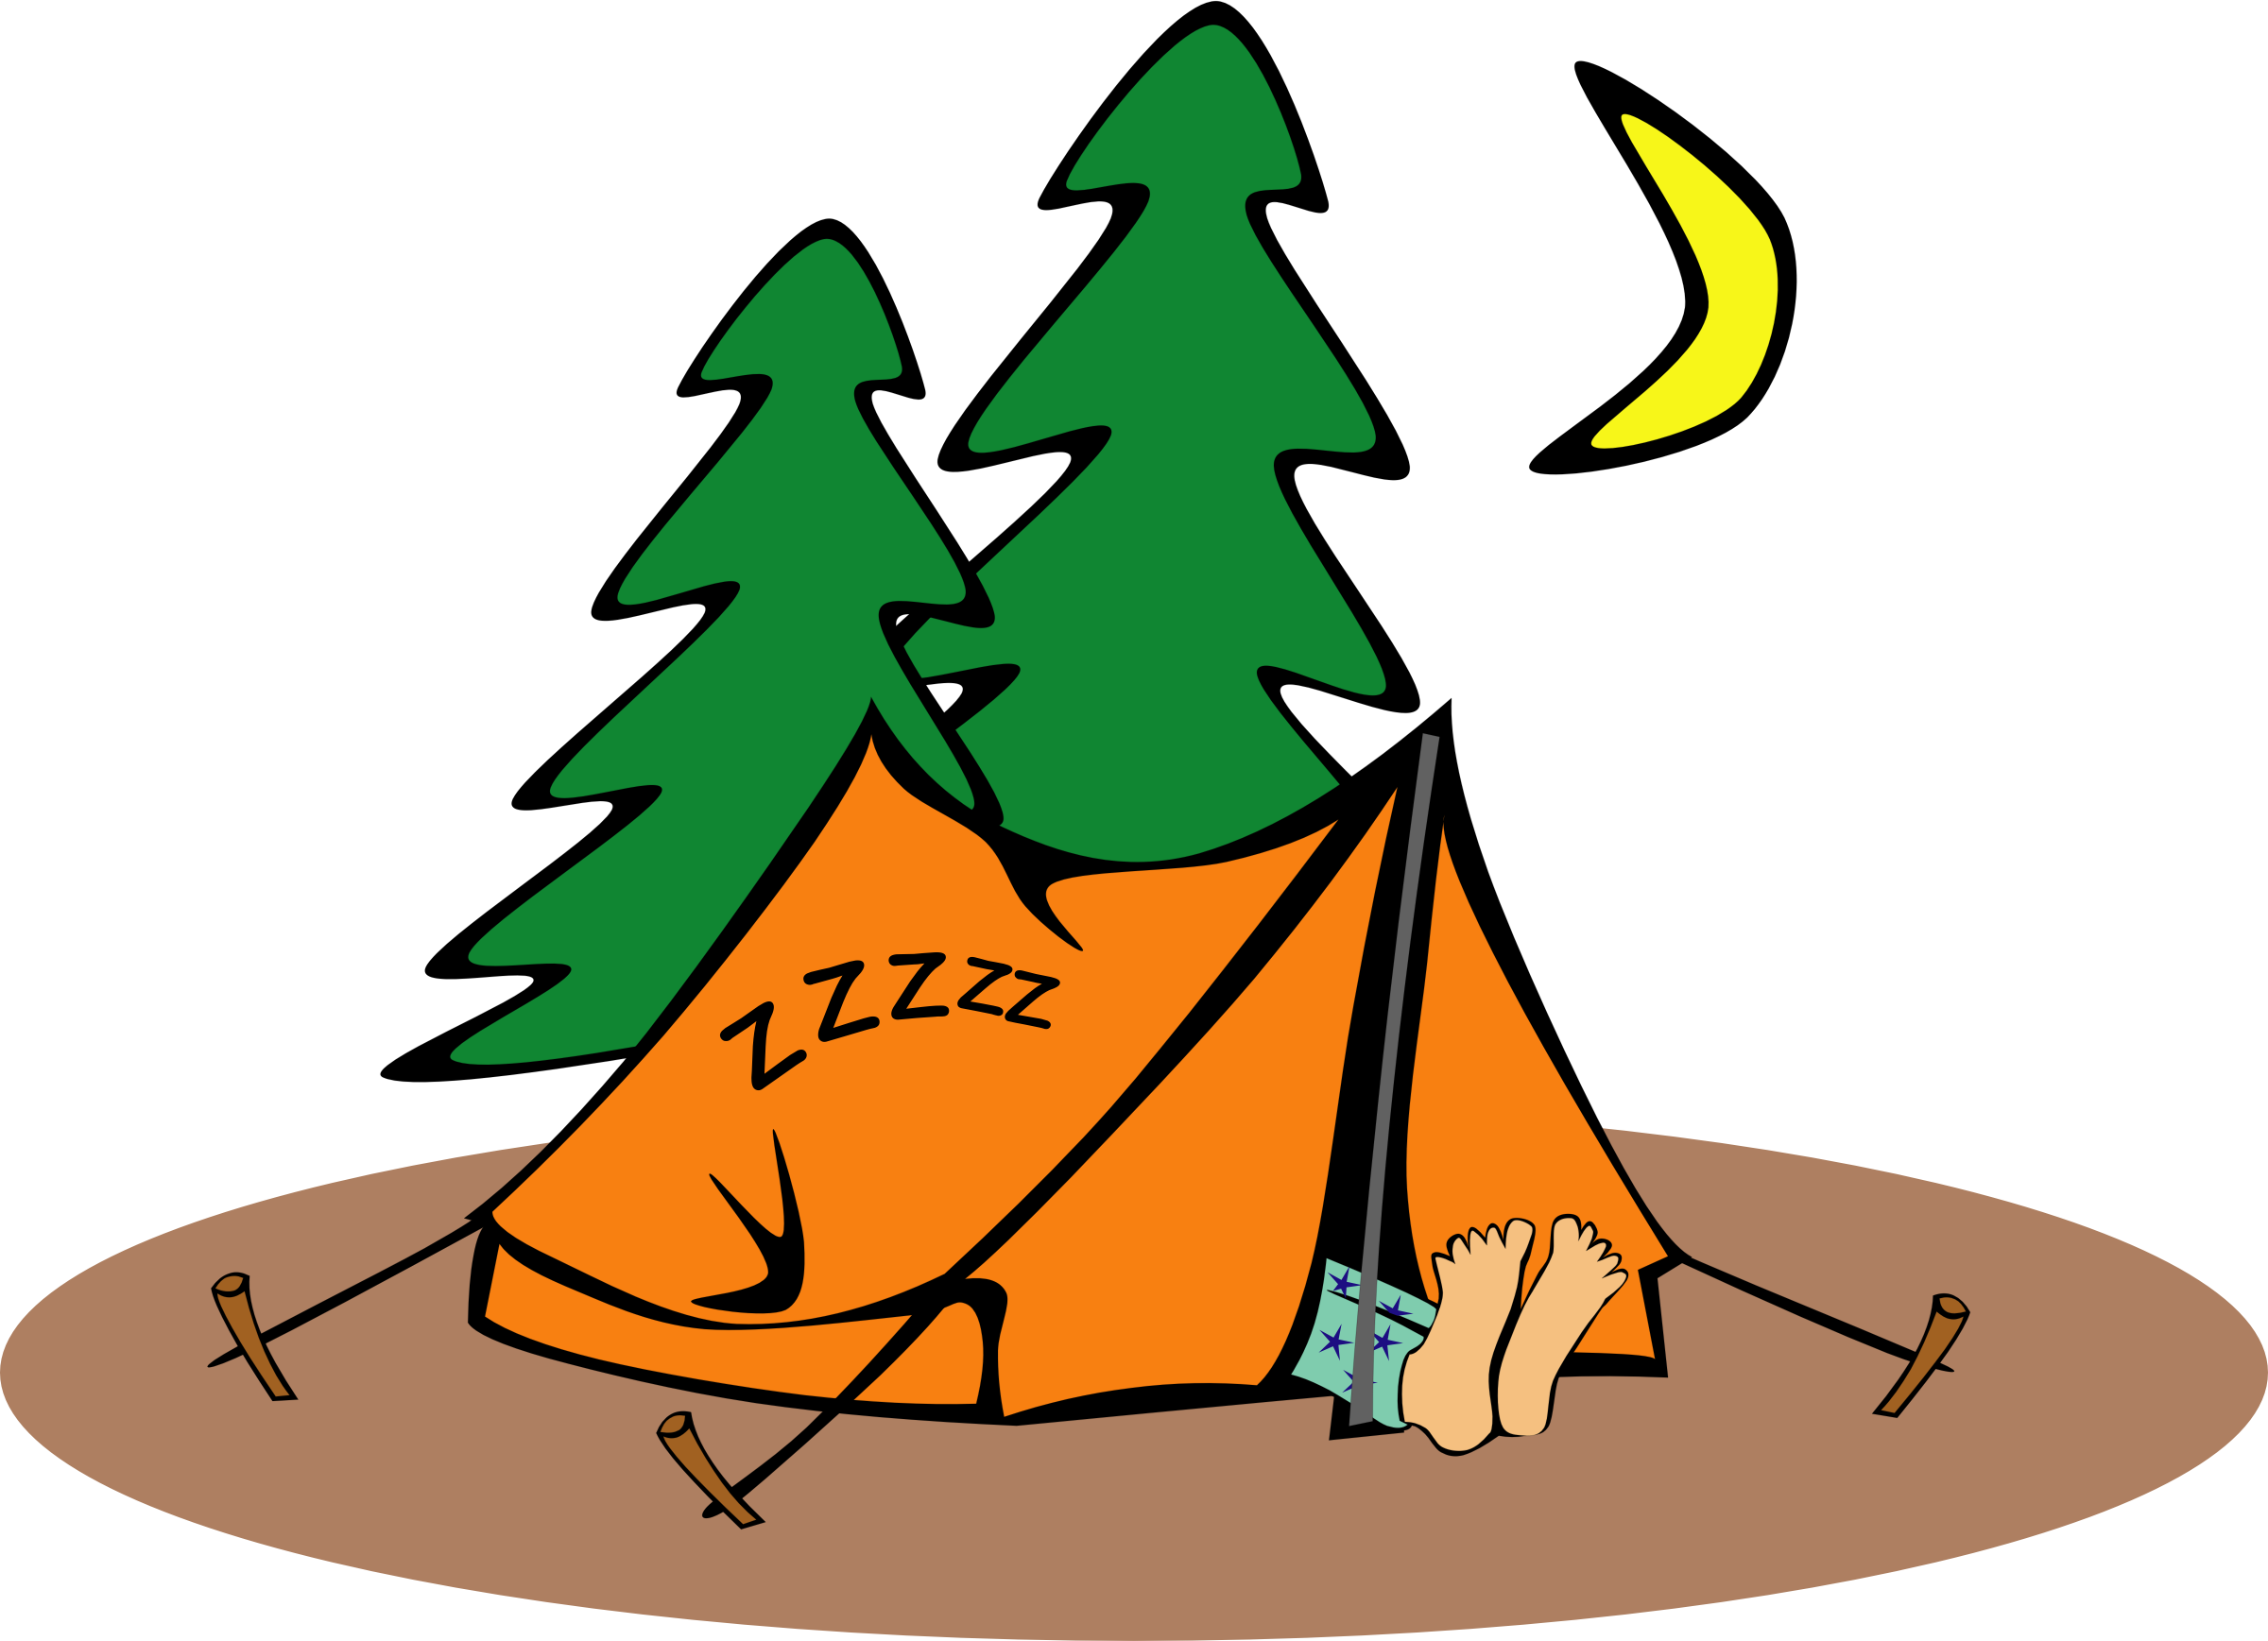 In A Tent - Camping Clipart.